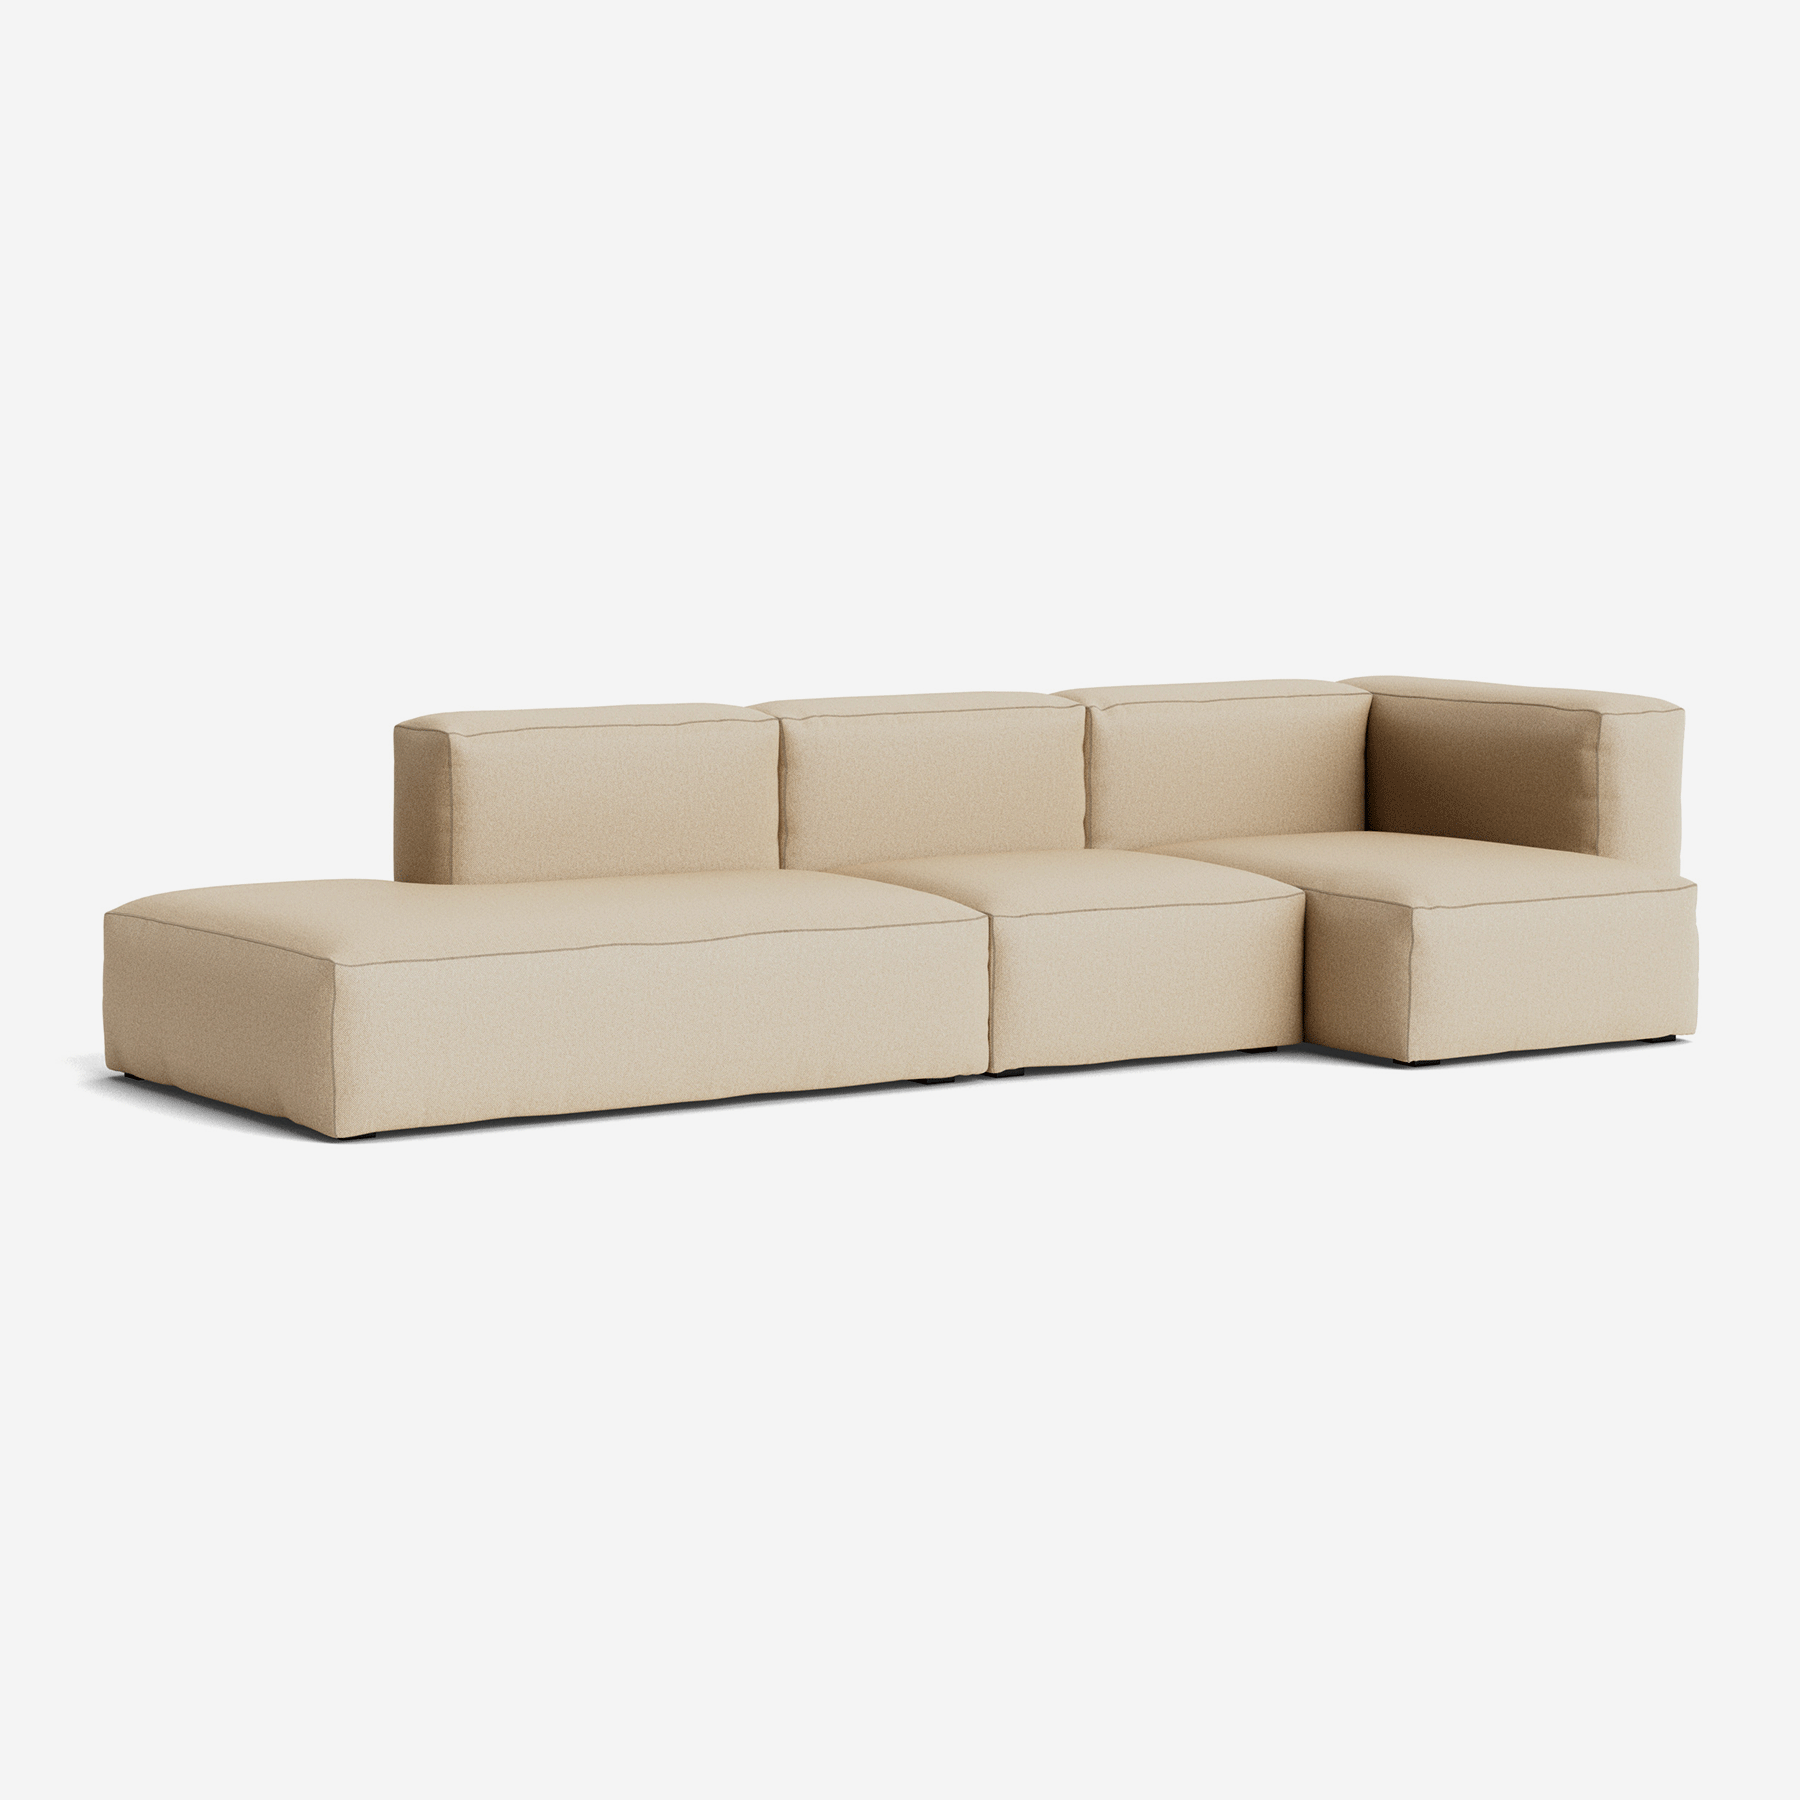 Mags Soft 3 Seater Sofa, Combination 3